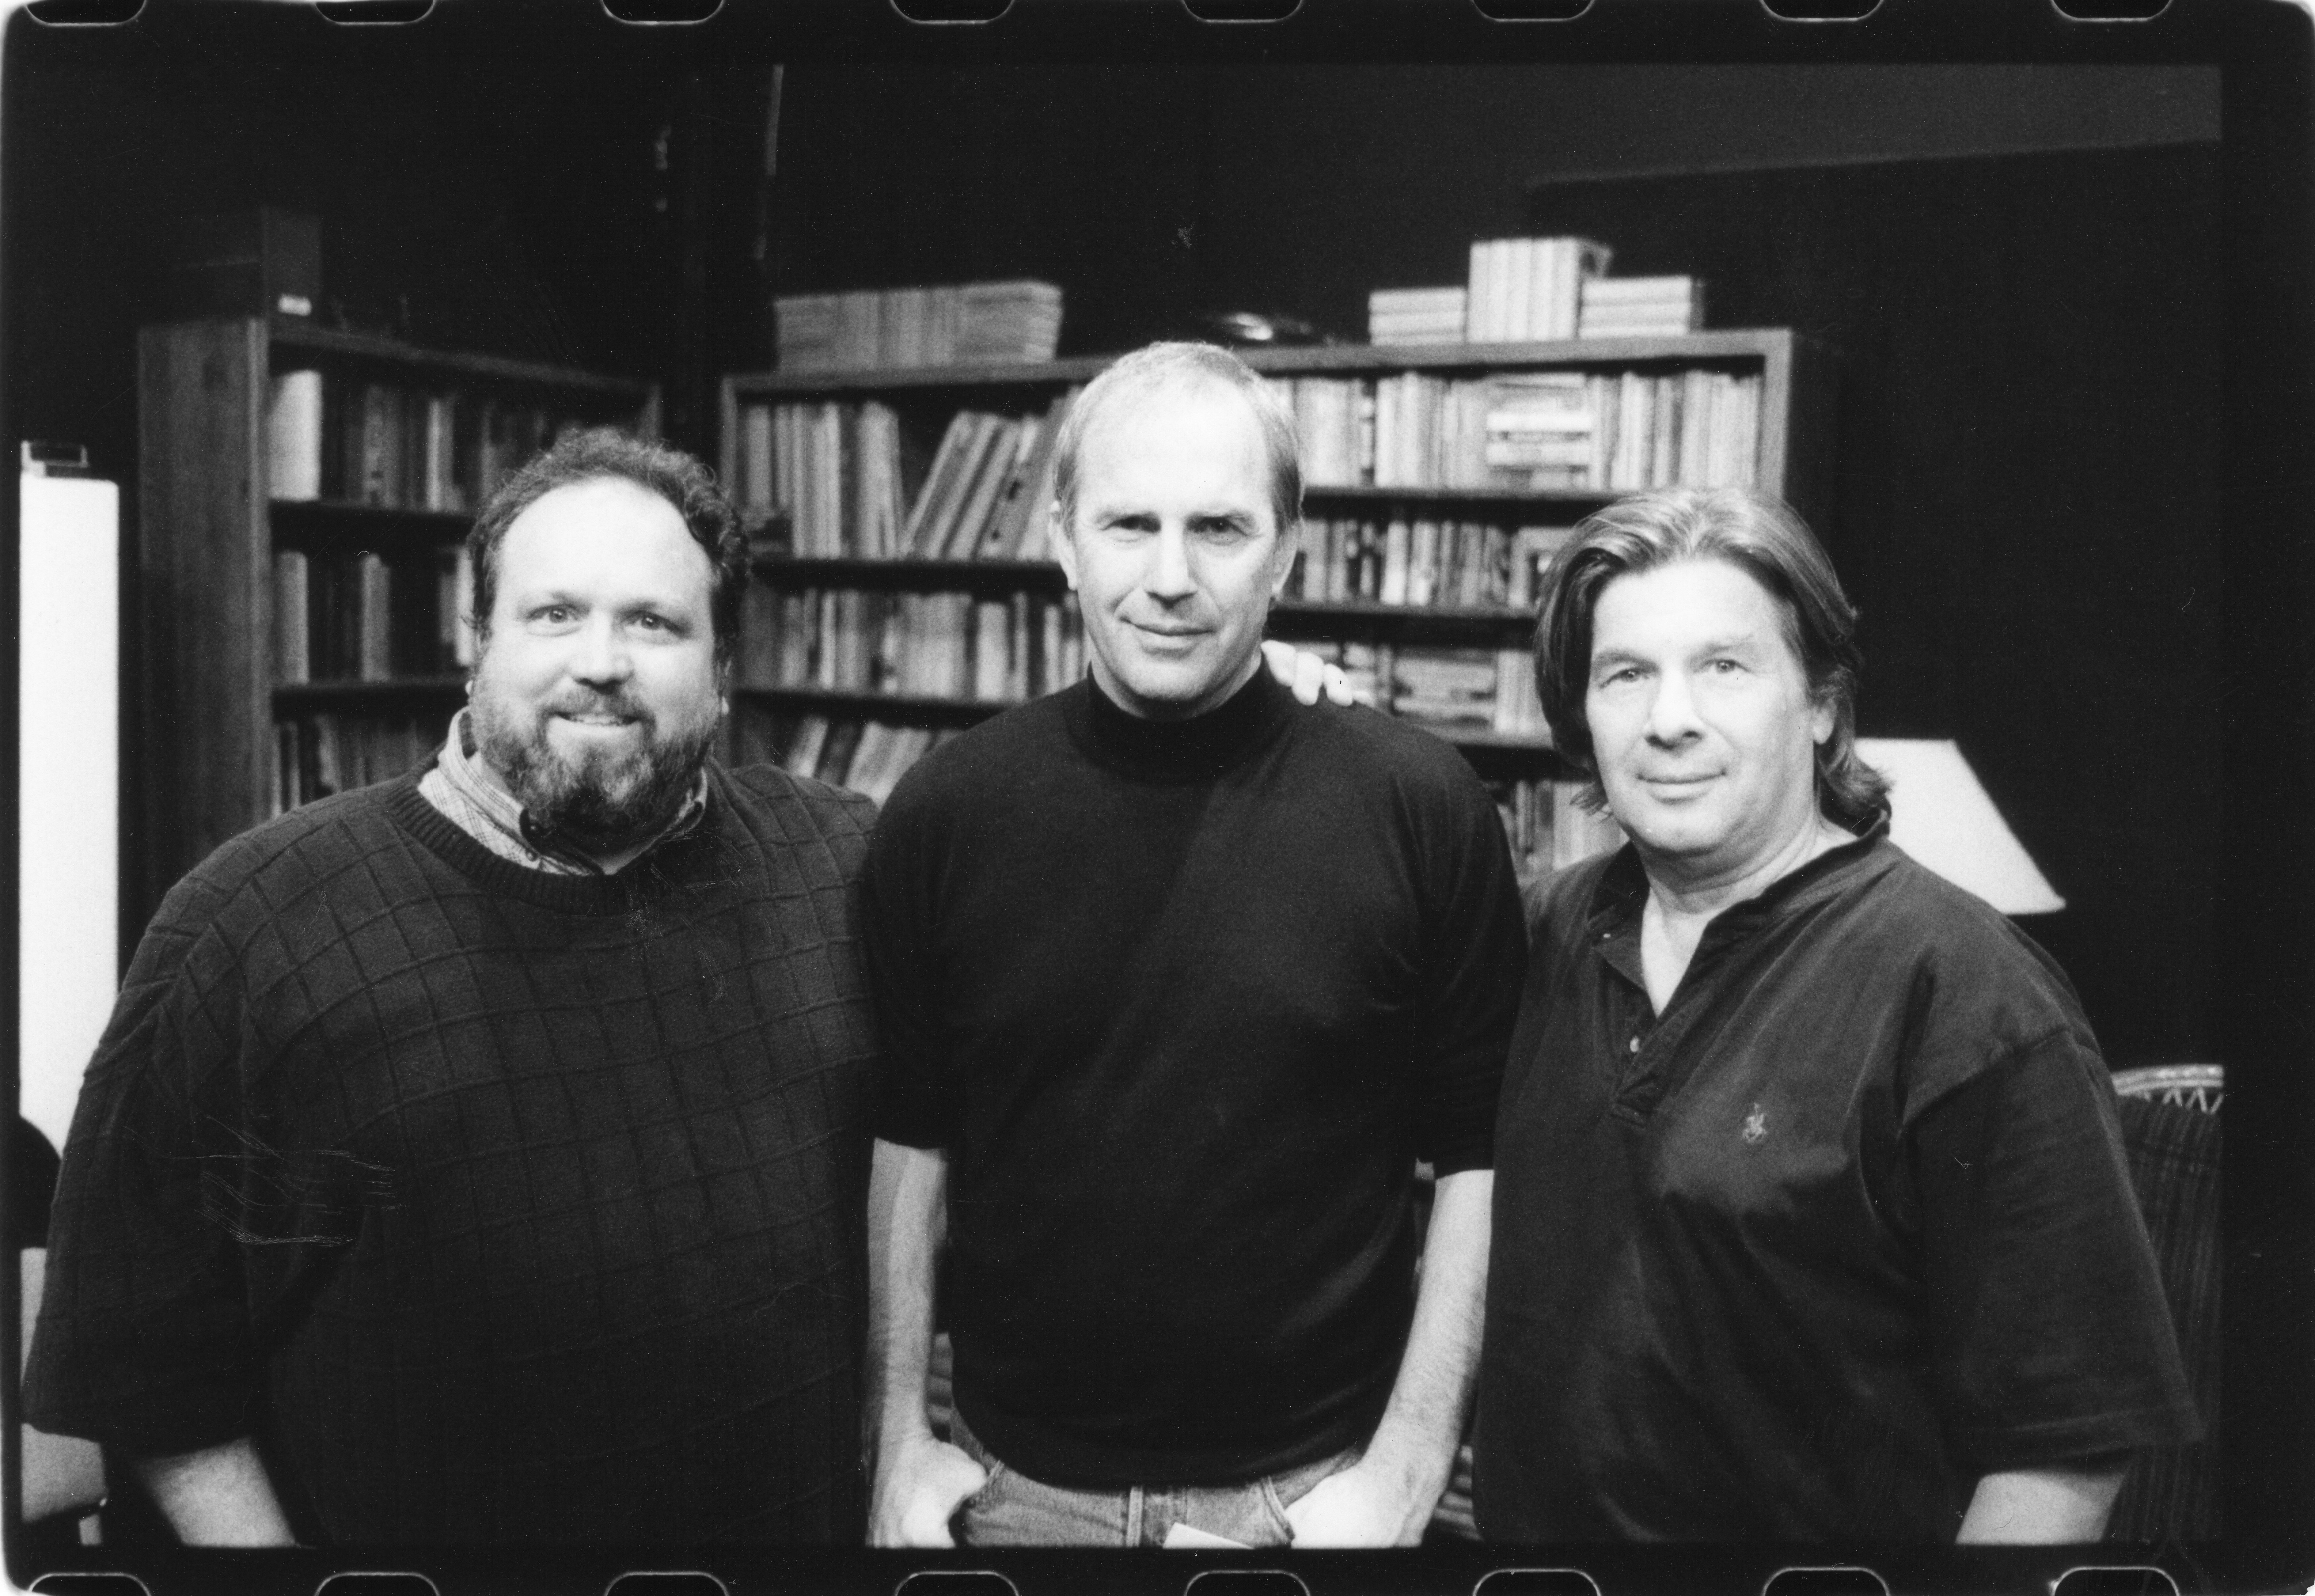 Gregory Avellone, Kevin Costner,and John Otrin at the 